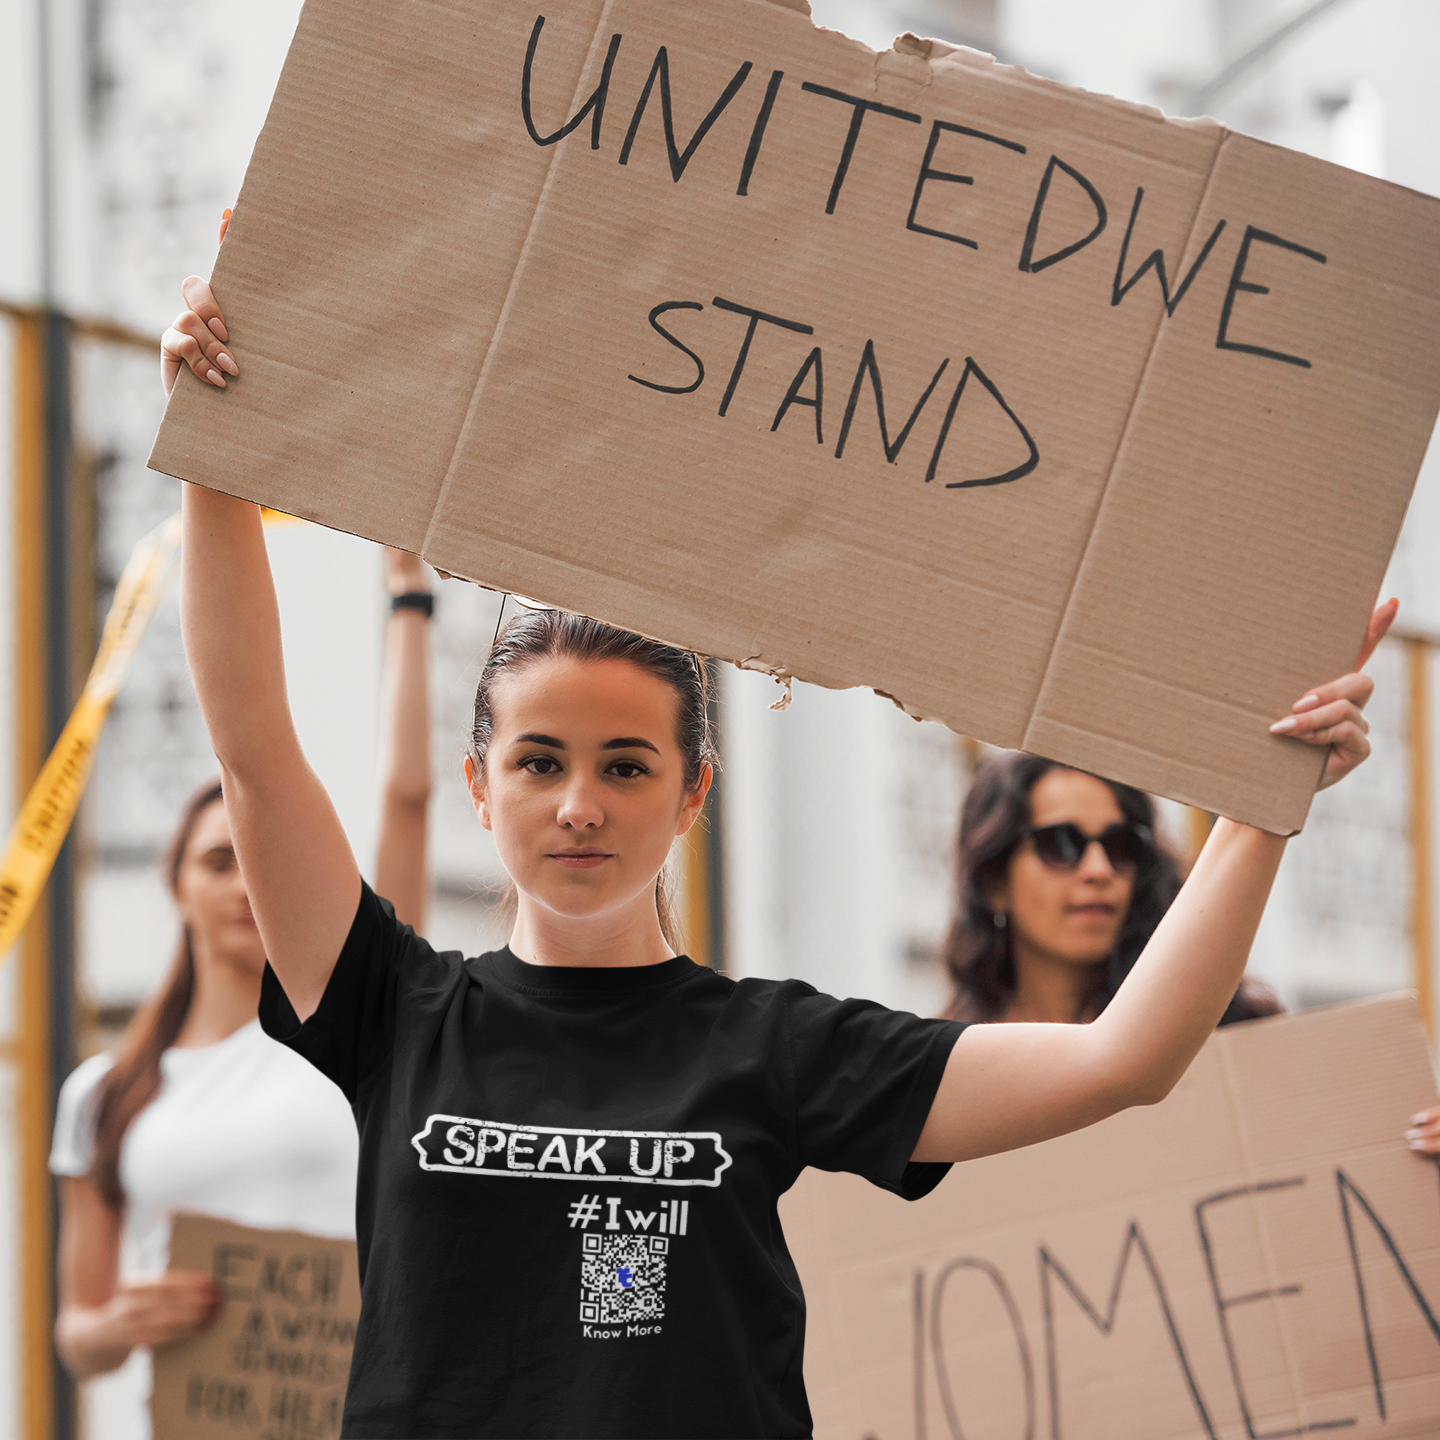 A female presenting person, that appears to be between the age of 16 and 20, is holding a large cardboard sign over their head that reads United We Stand. They appear to be marching with other female presenting people for women's rights. The person holding that sign is also wearing a black CLAIM It Tee™ with a CLAIM™ that reads {SPEAK UP} #Iwill. 